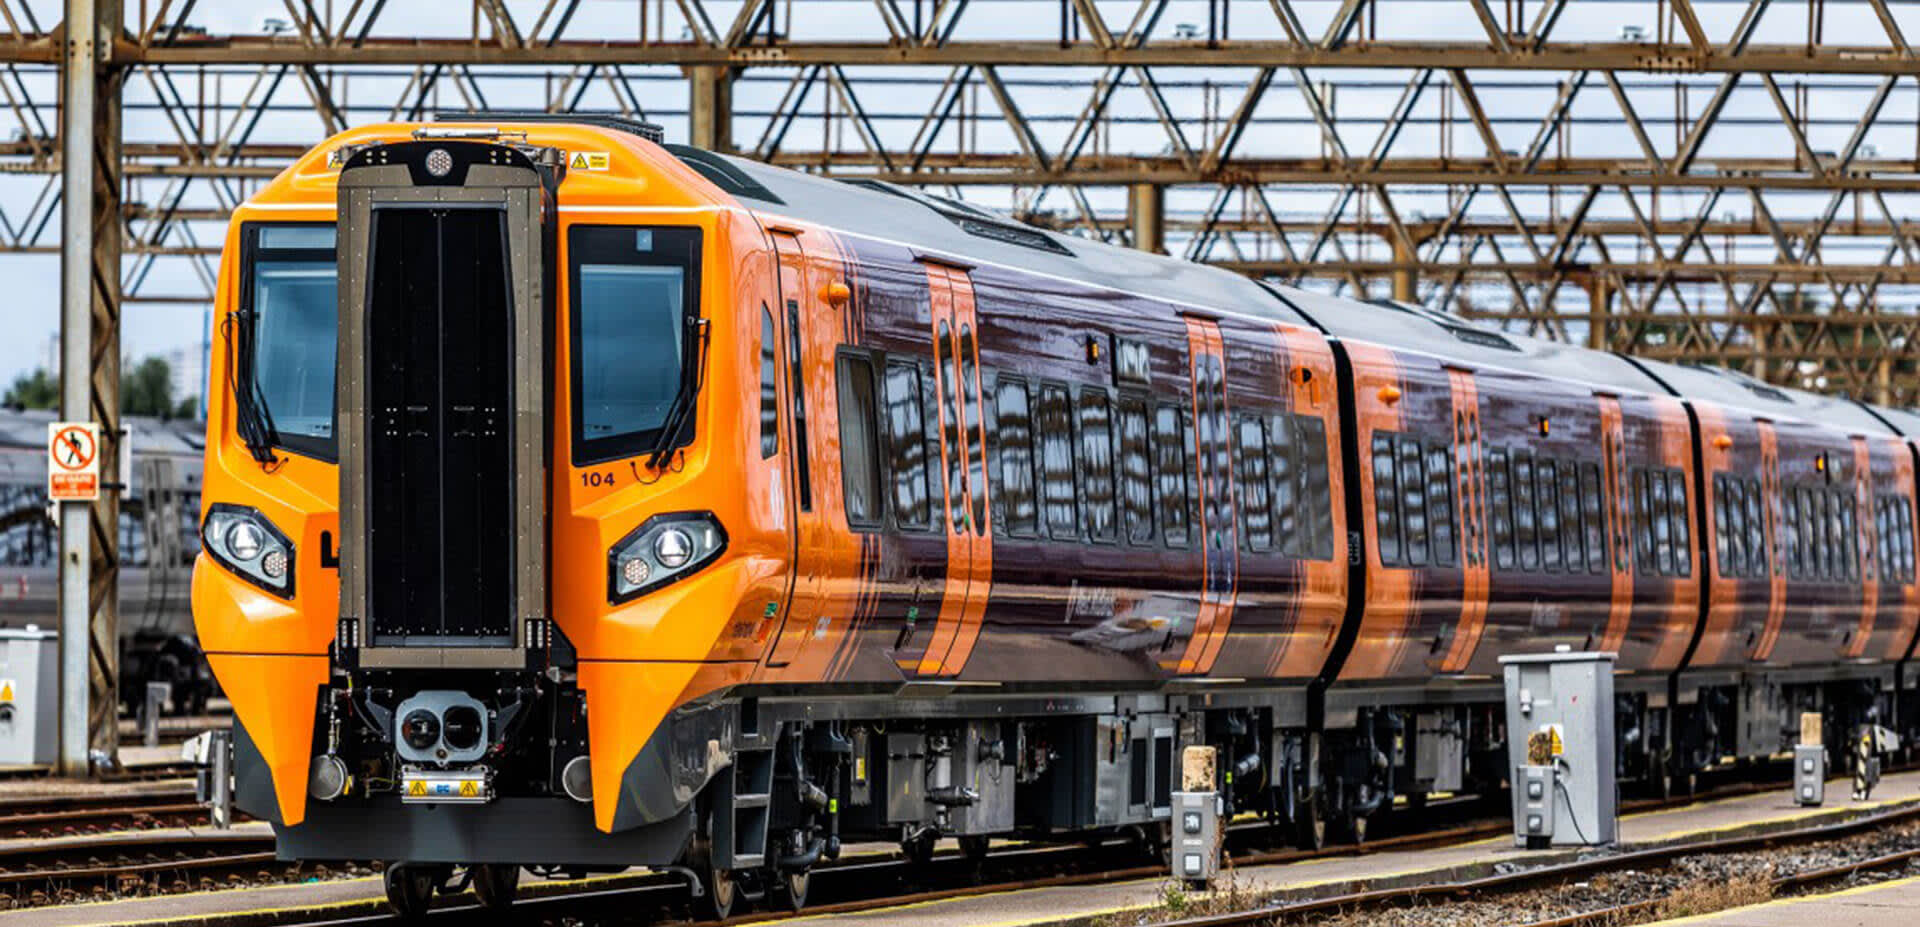 West Midlands Trains Class 196 train in orange and purple livery